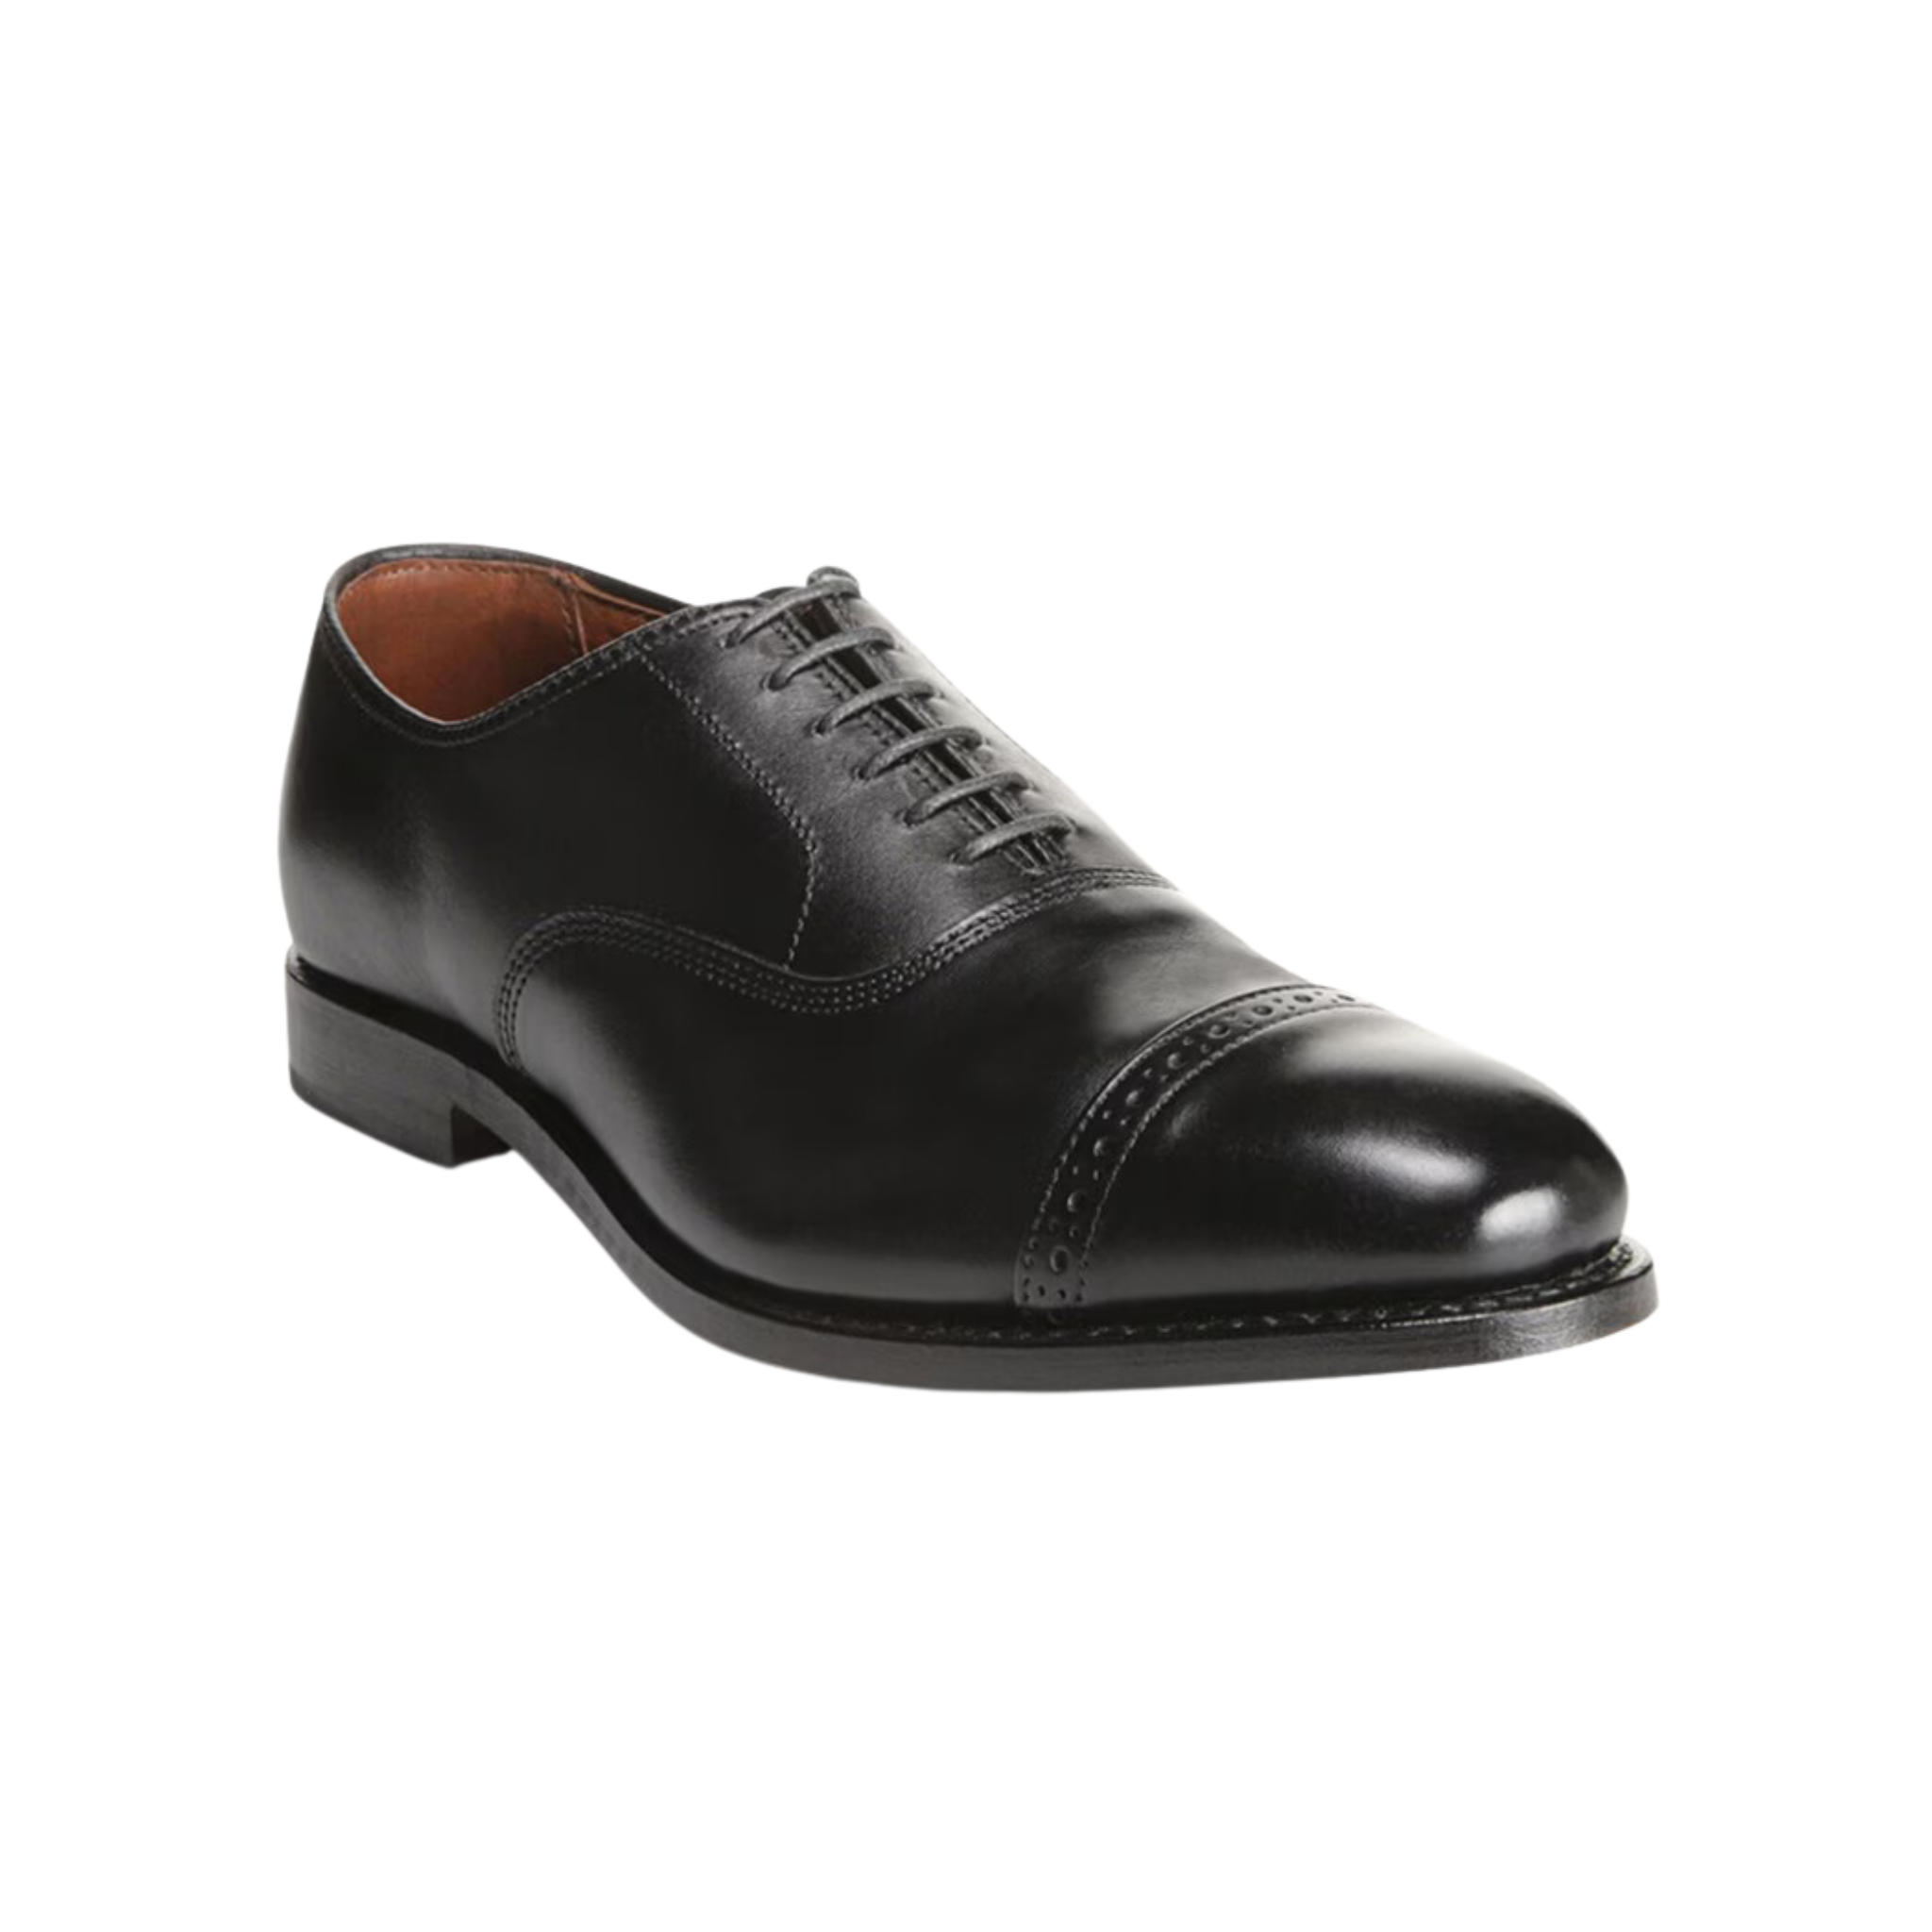 Allen Edmonds Warehouse Sale: Save Up to 70% on Select Styles